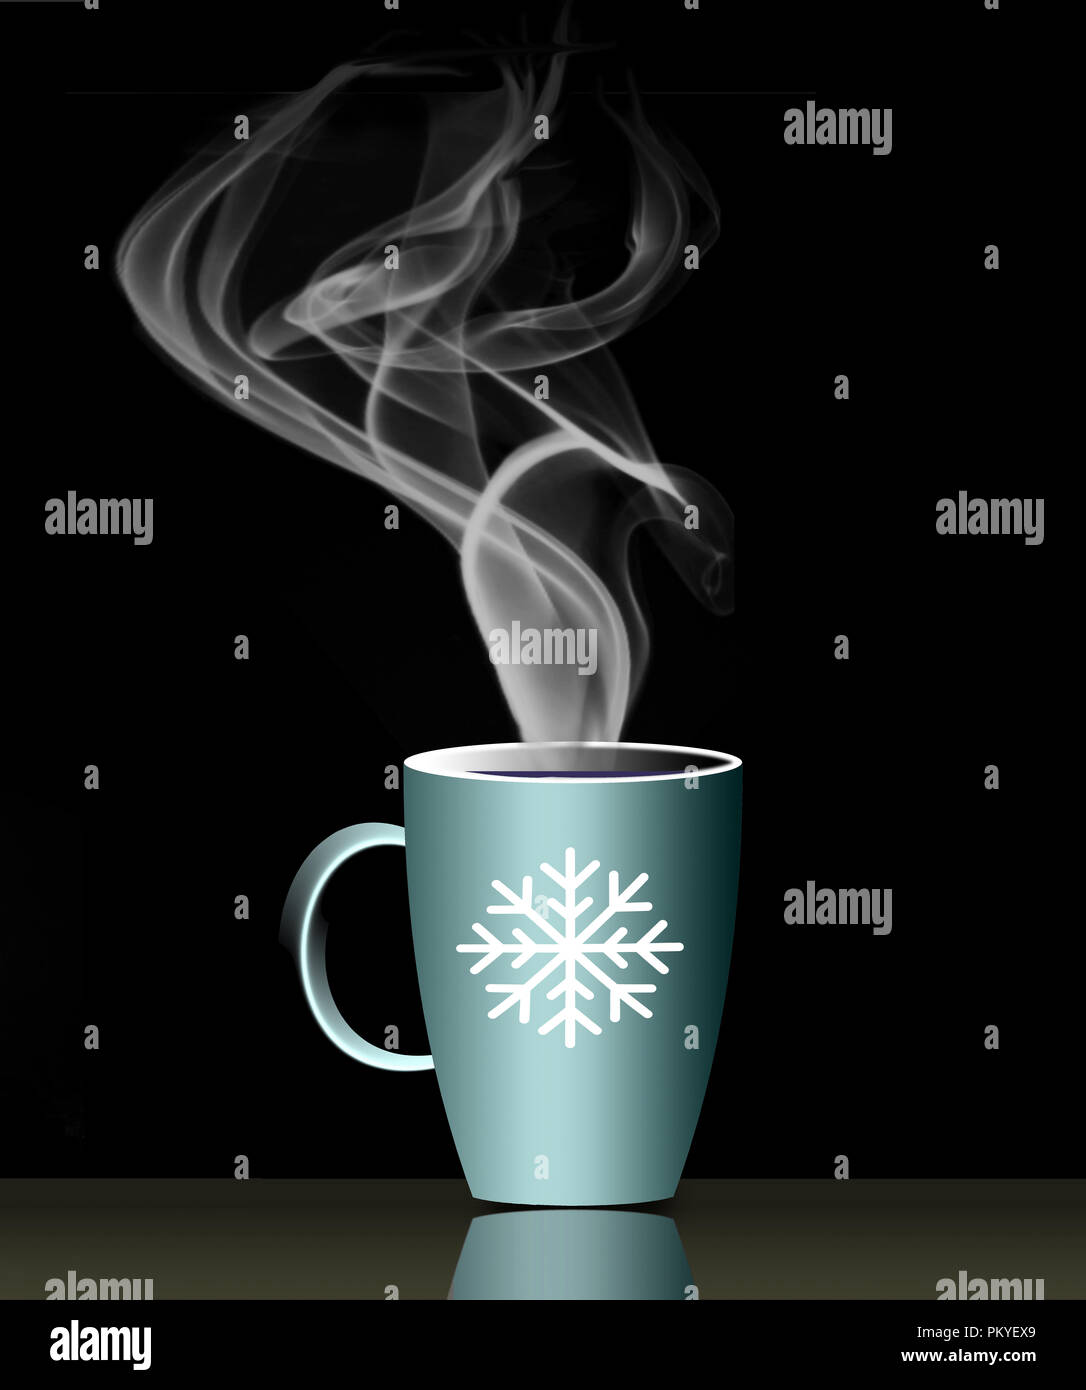 https://c8.alamy.com/comp/PKYEX9/hot-holiday-drinks-is-illustrated-with-a-steaming-mug-on-a-snowy-dark-background-holiday-hot-drink-drink-steam-hot-chocolate-cider-coffee-te-PKYEX9.jpg